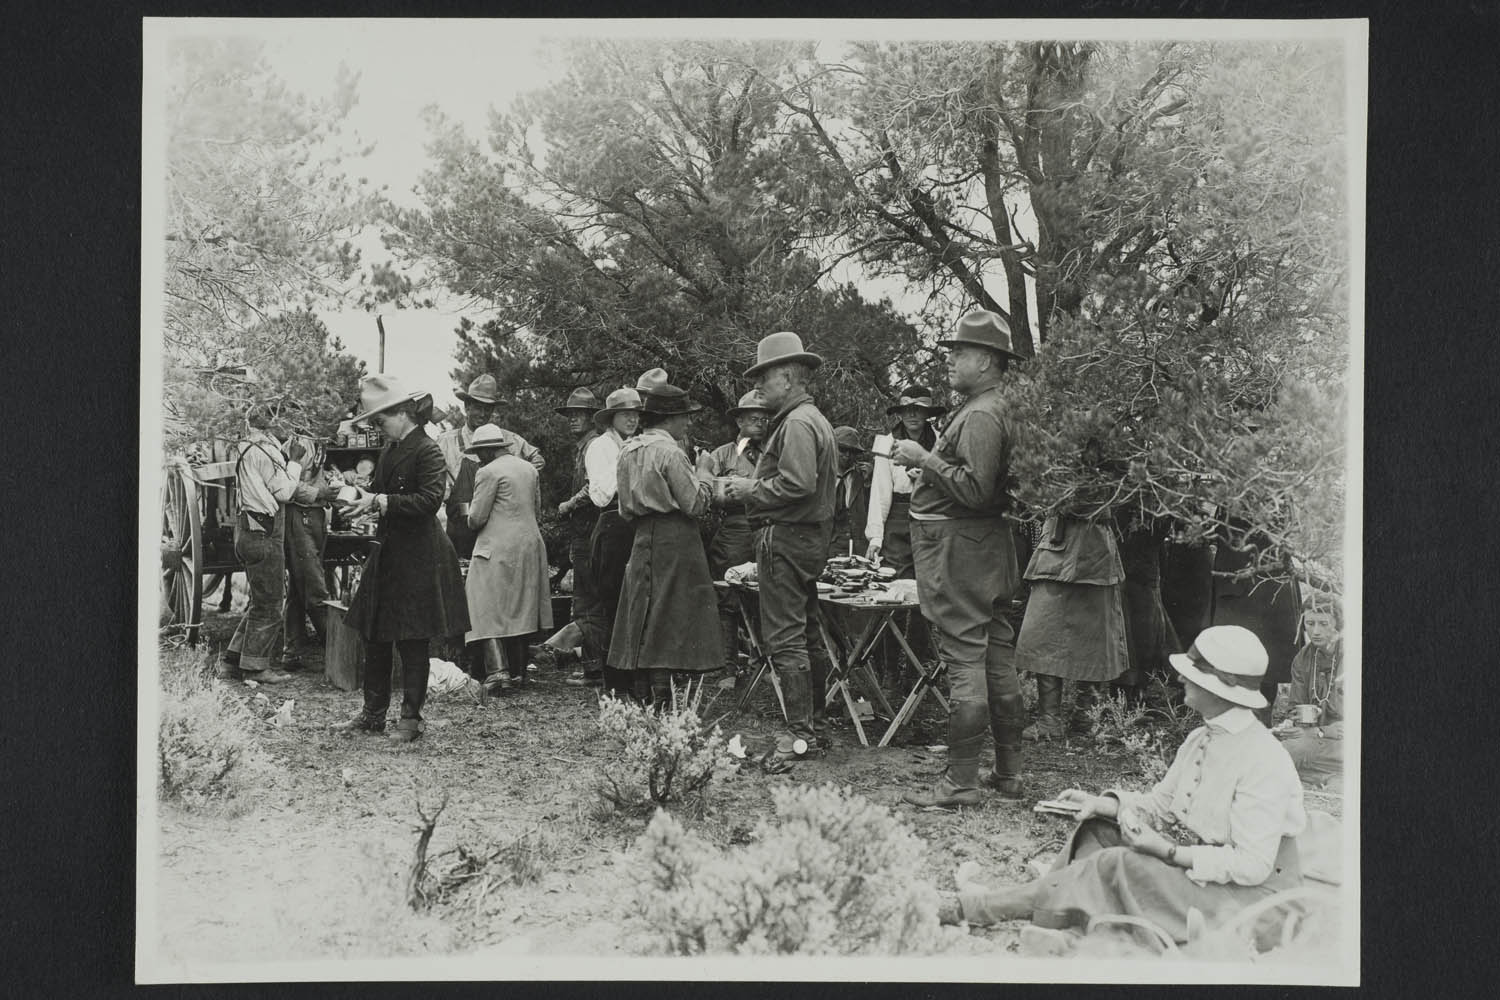 black & white photograph of men and women eating outdoors